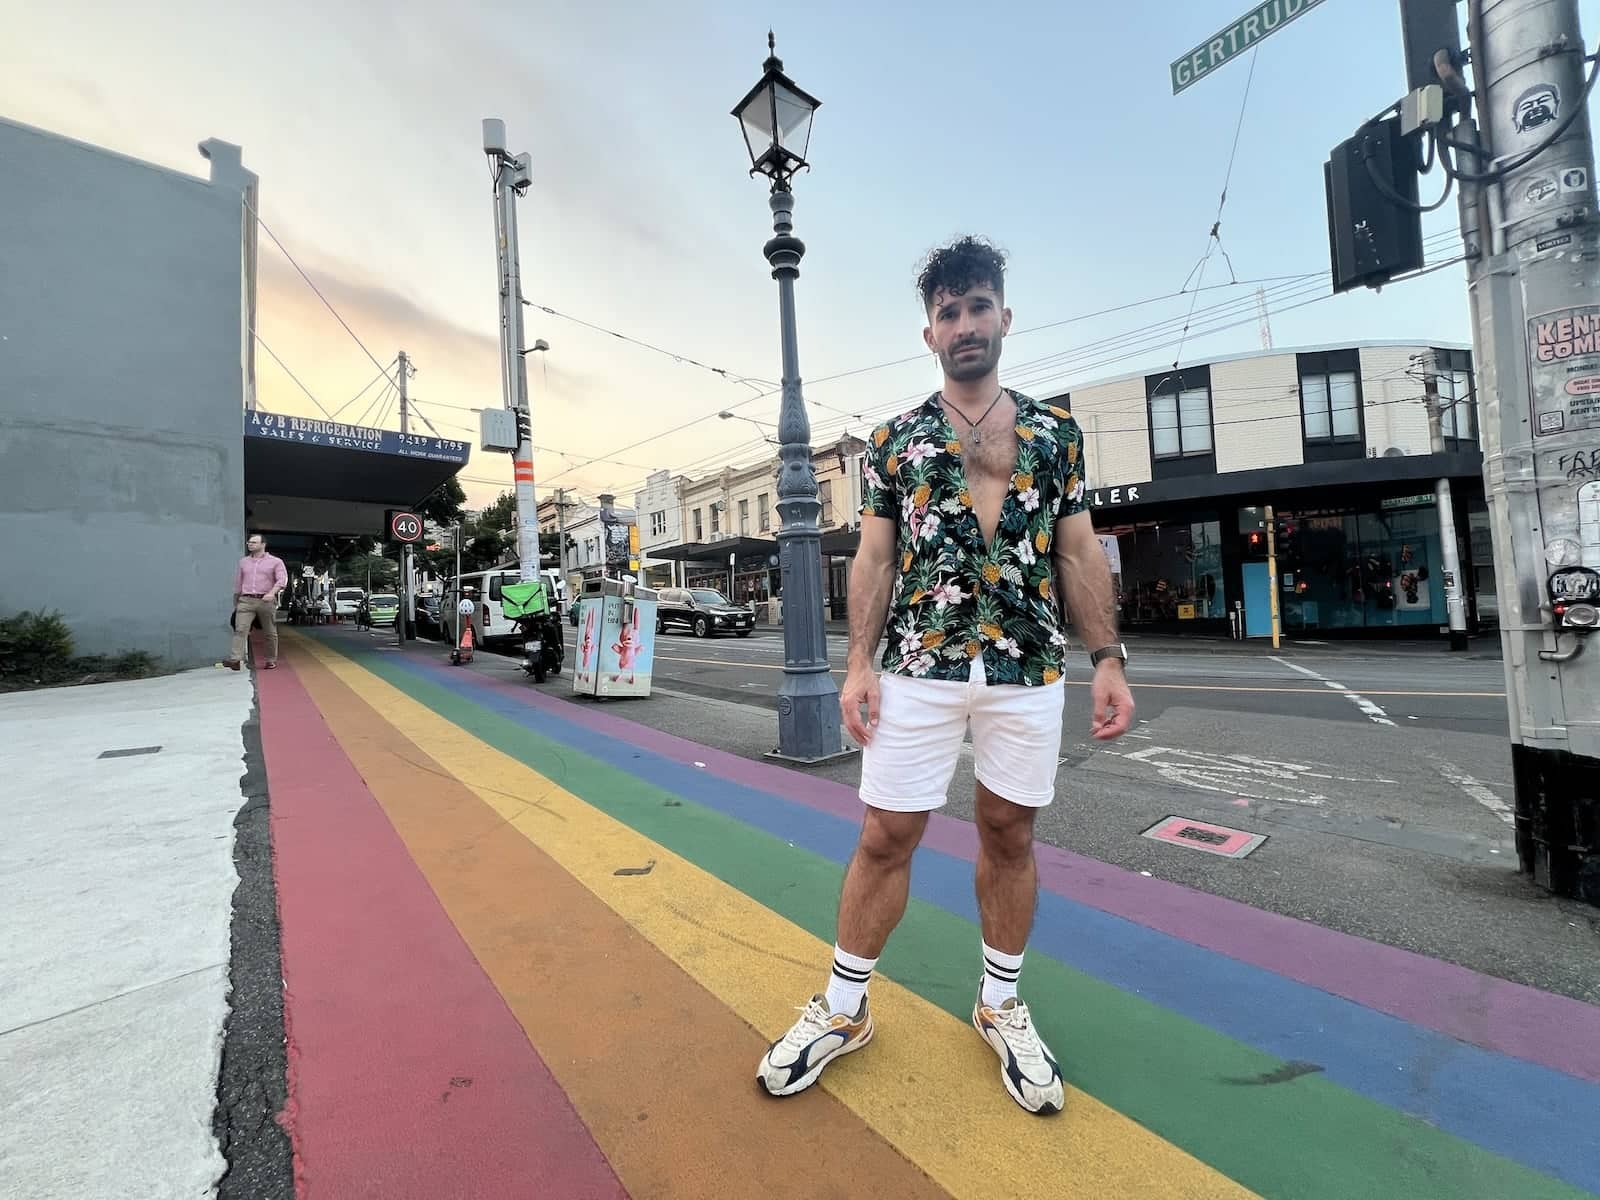 Stefan on the Smith and Gertrude Street rainbow crossing in the gay area of Melbourne.